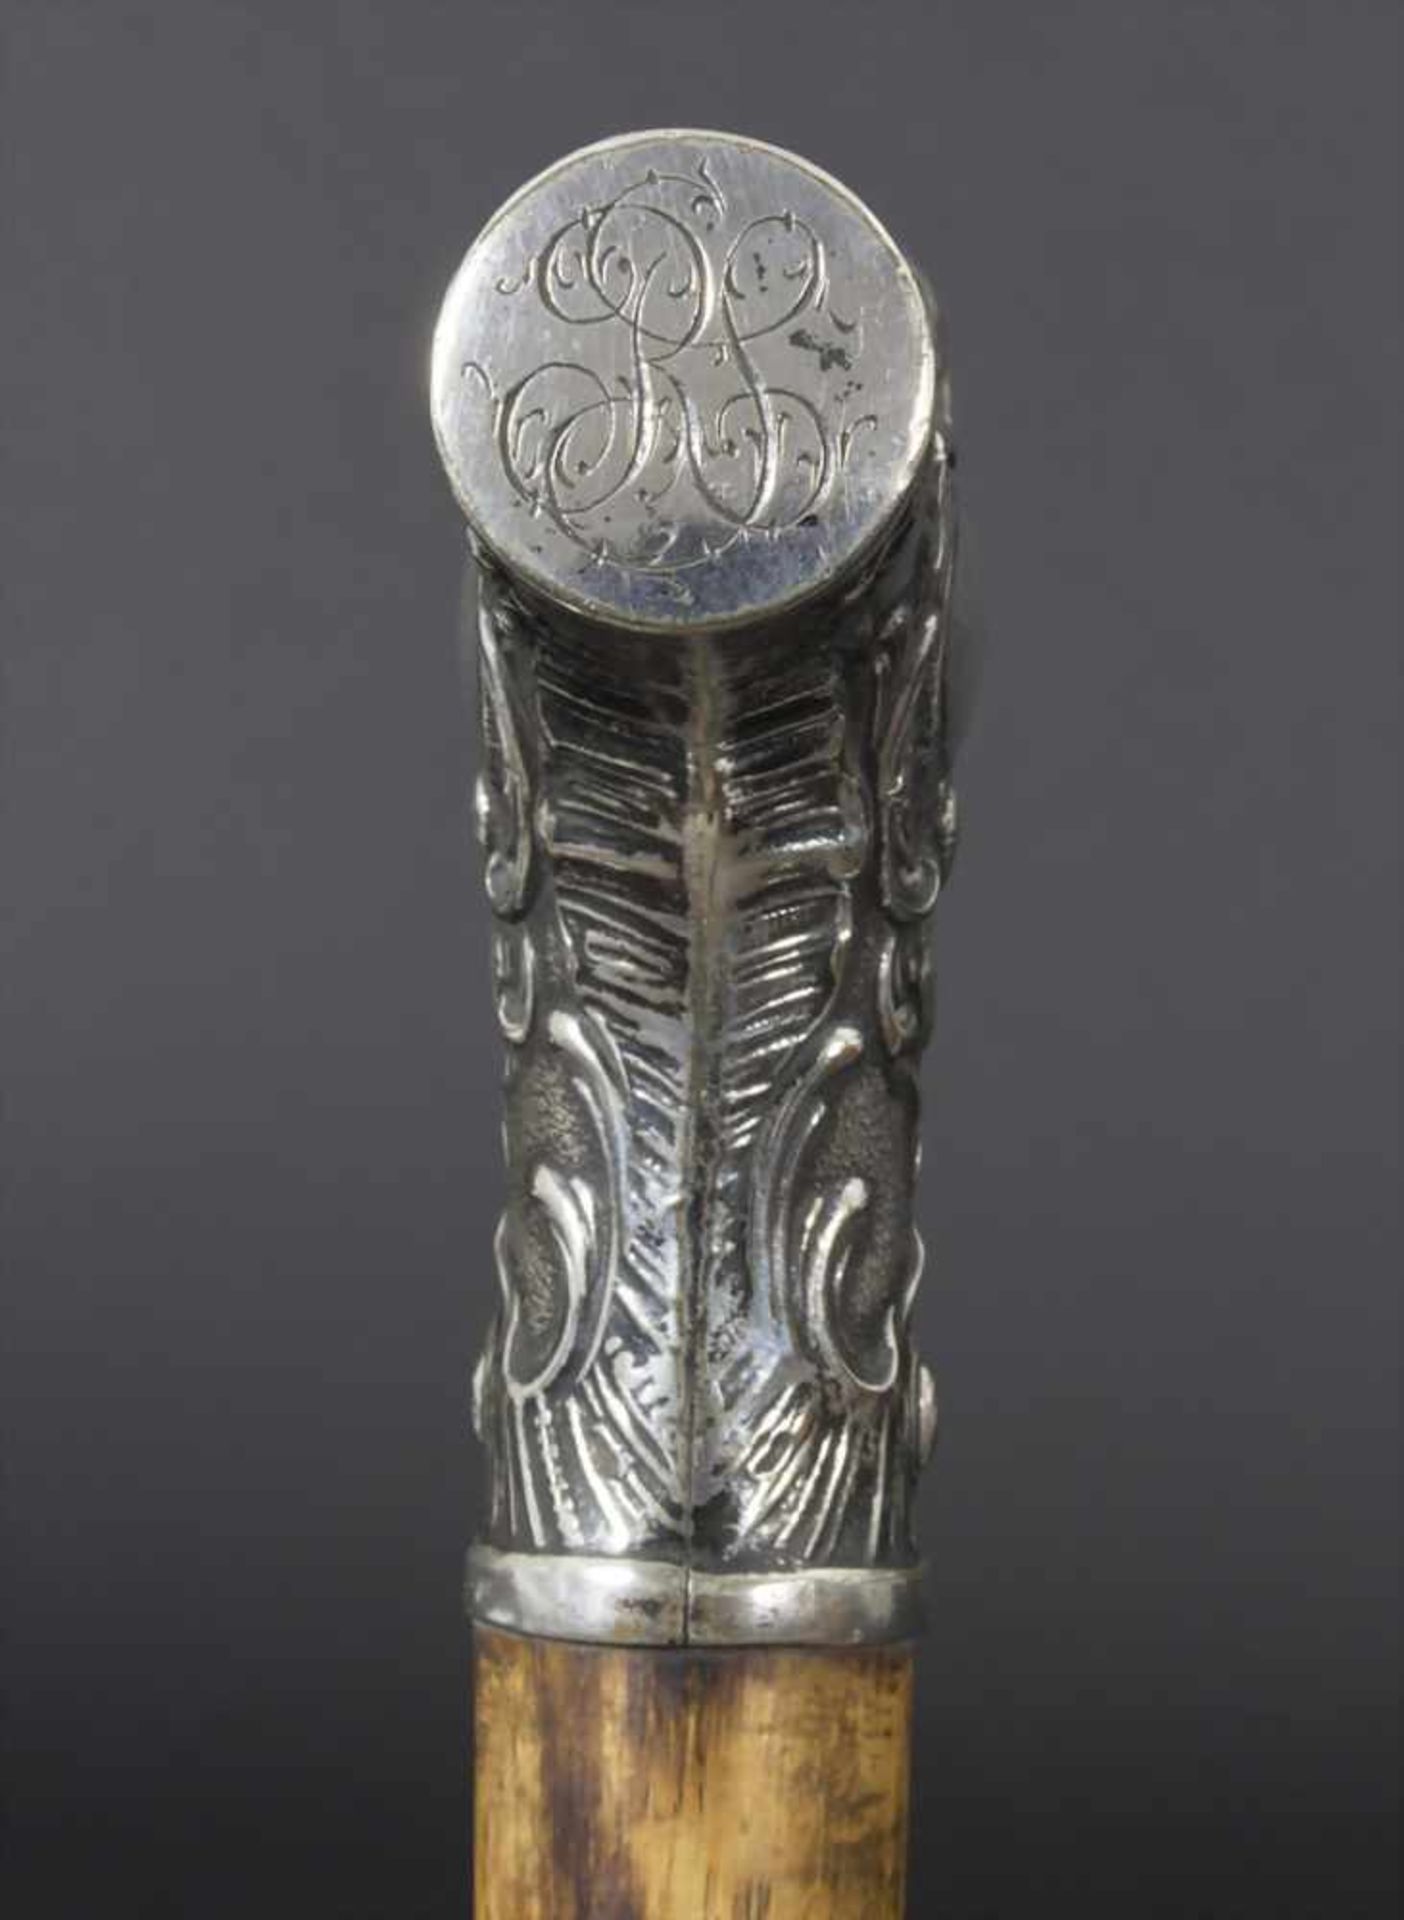 Gehstock mit Silbergriff 'Rocaille' / A silver handle 'Rocaille', Ende 19. Jh.Material: Silber, - Image 4 of 5